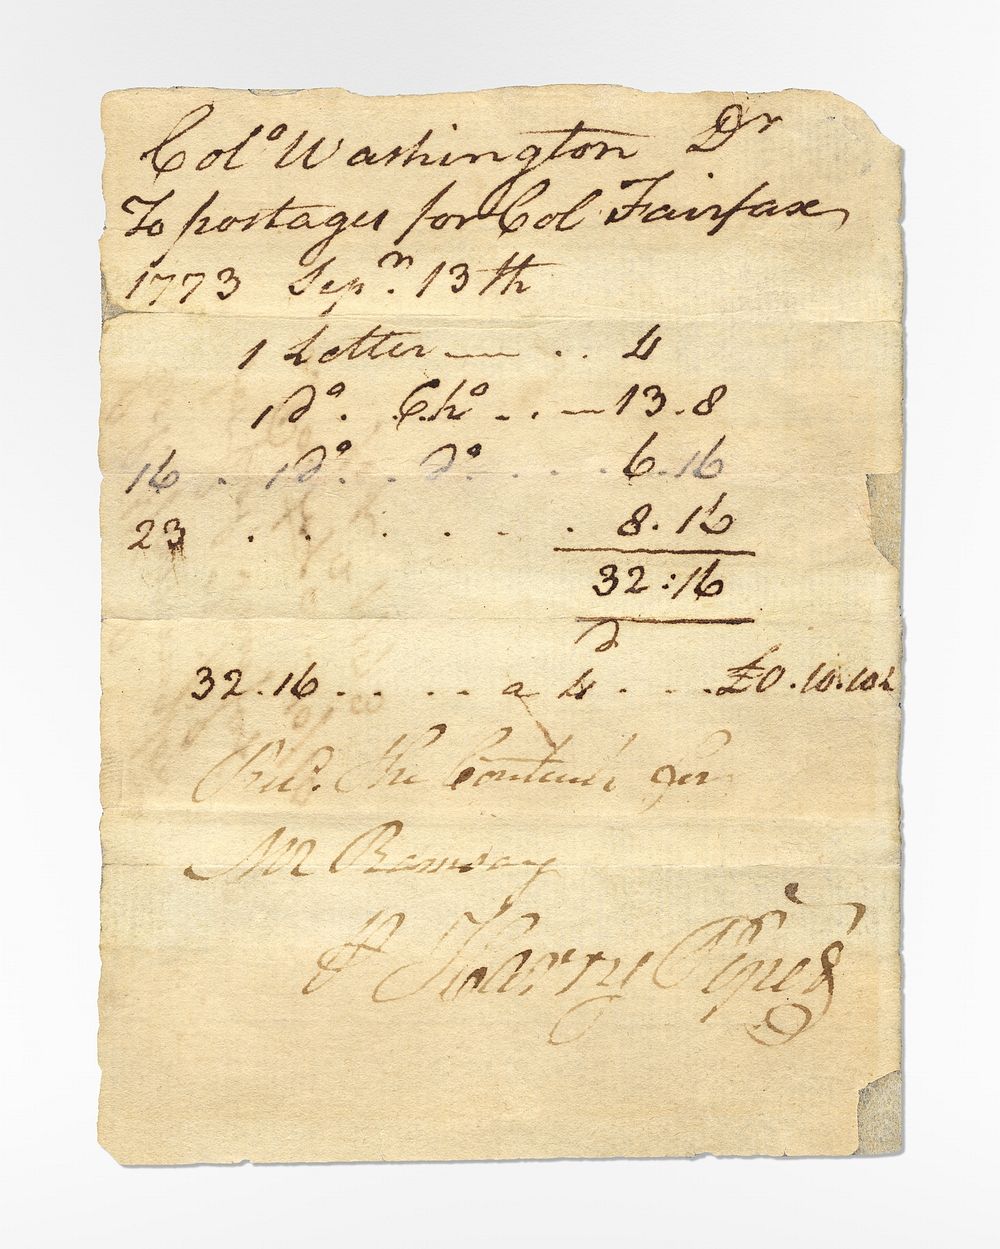 Colonel George Washington's postage account (1773) written by George Washington. Original public domain image from The…